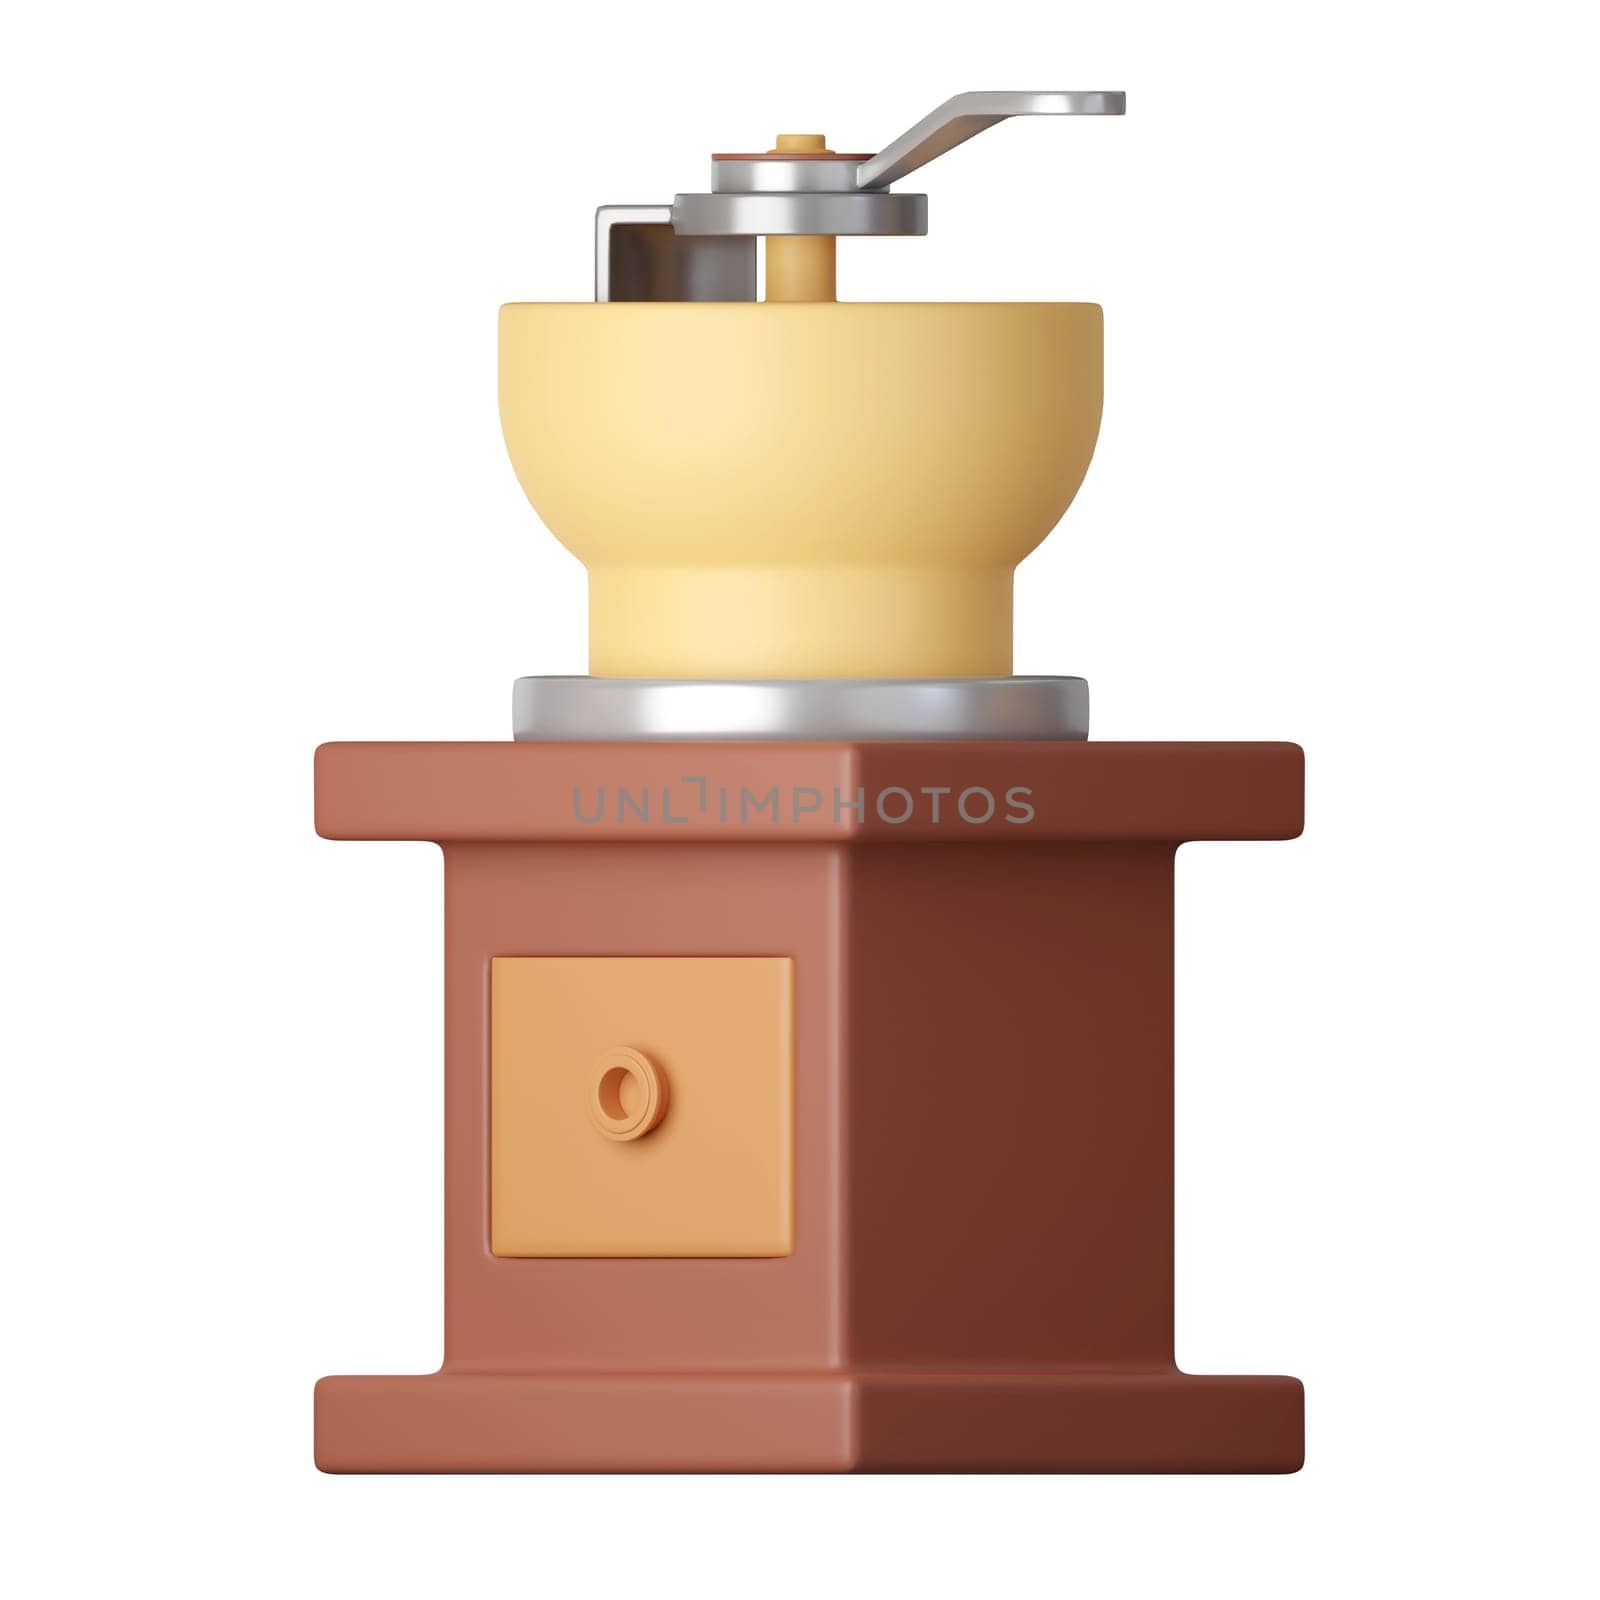 coffee grinder coffee bean maker Cartoon Style Isolated on a White Background. 3d illustration by meepiangraphic